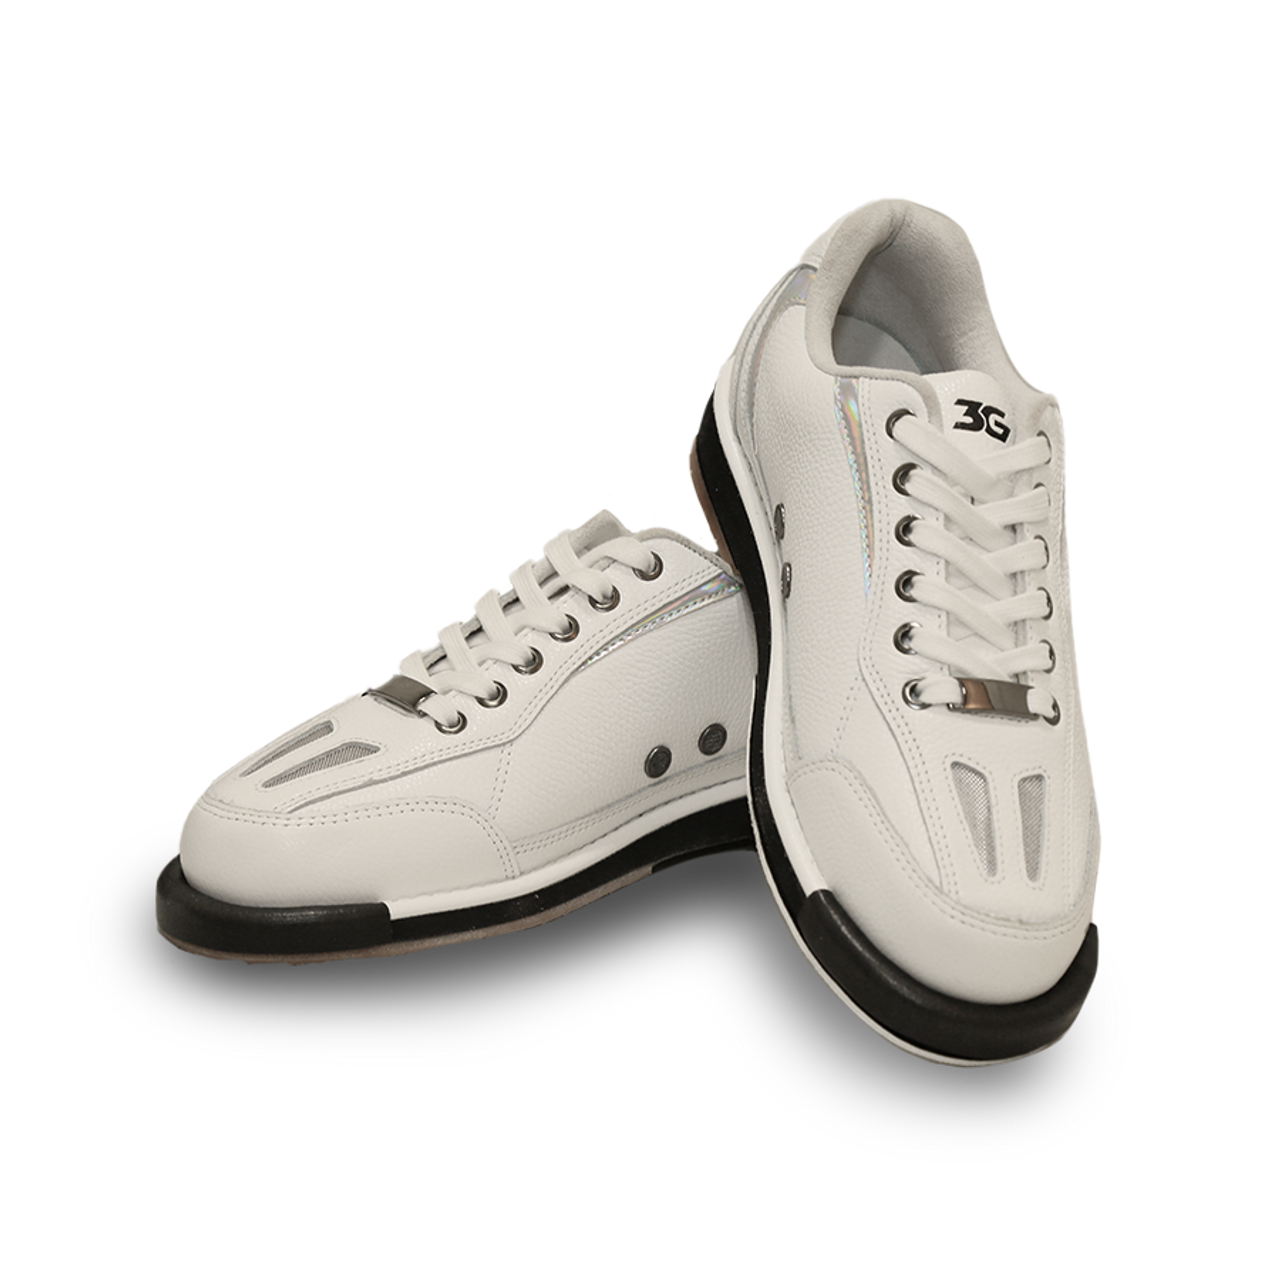 3G Racer Mens Bowling Shoes White/Holo Right Hand Medium